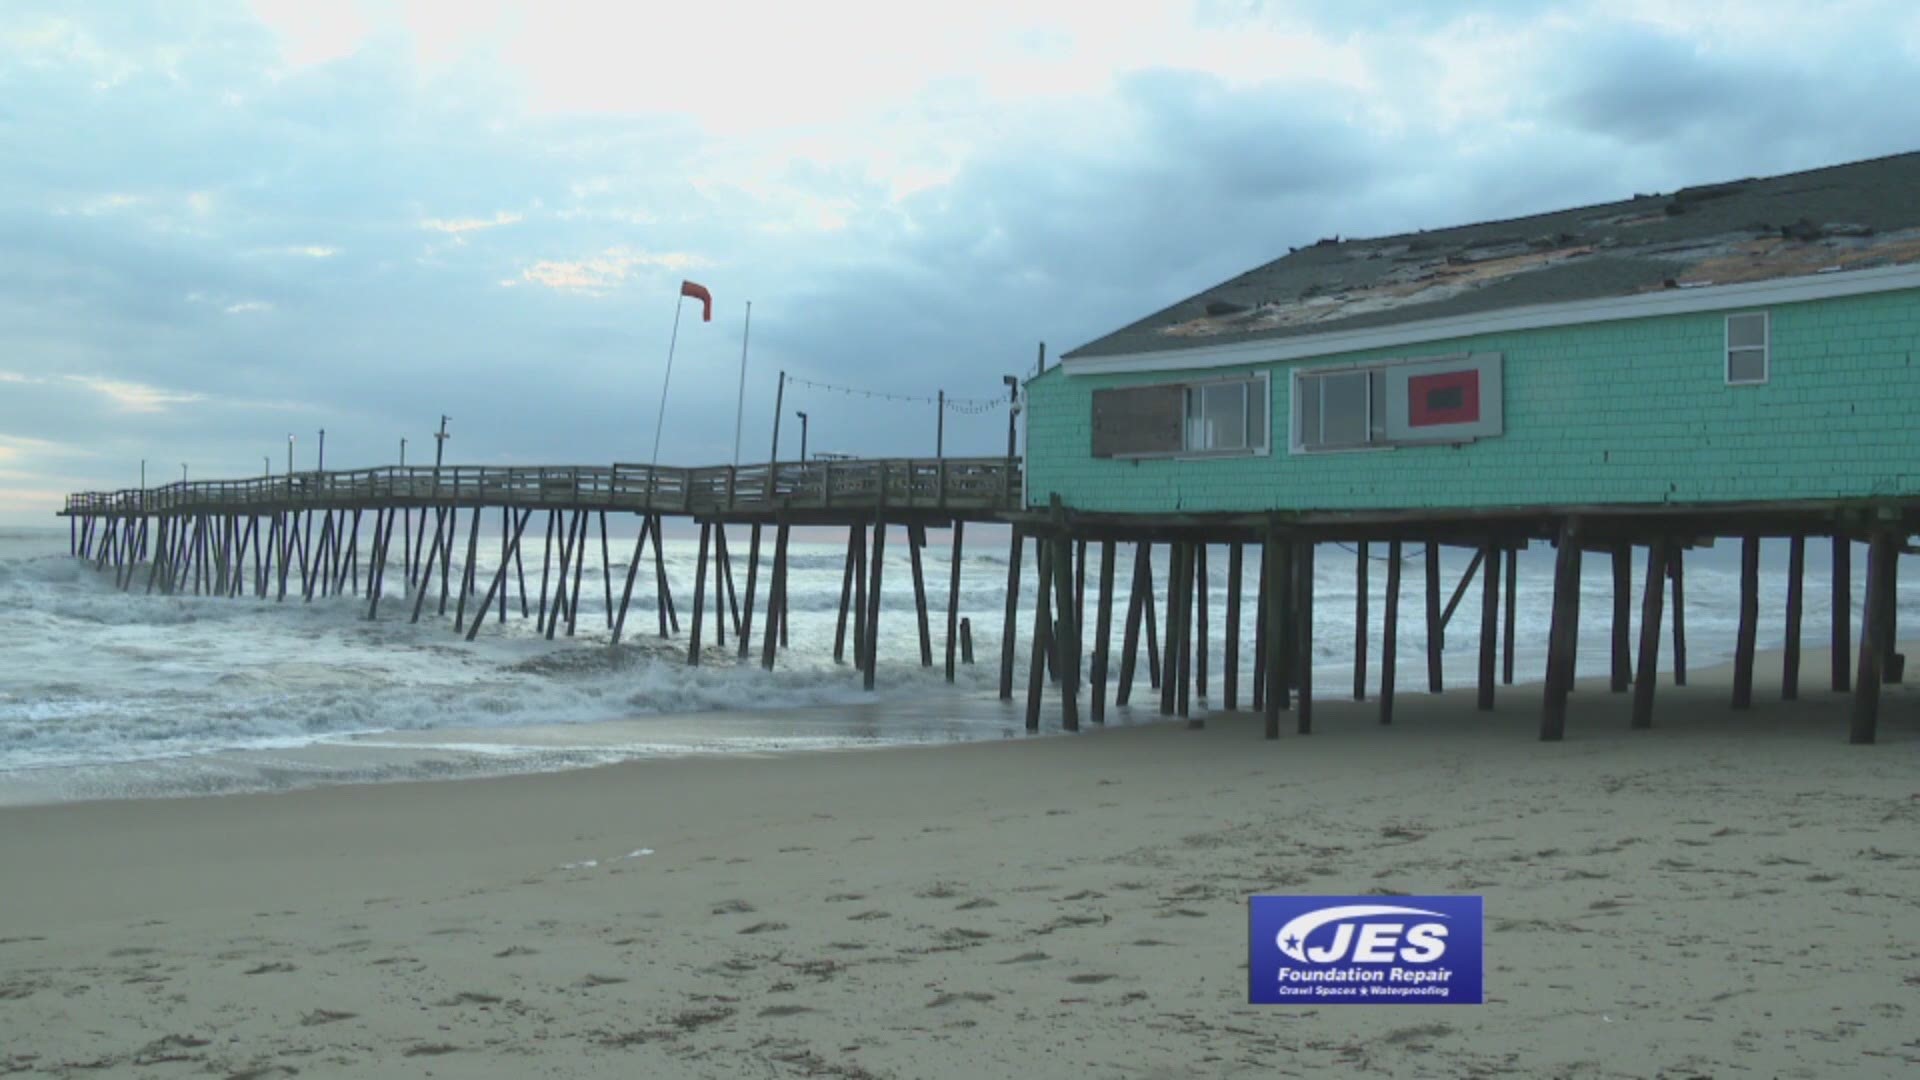 Locals said the Outer Banks community will unite to help repair all the damage Dorian left behind. Damage to homes includes missing shingles off roofs, torn sidings.